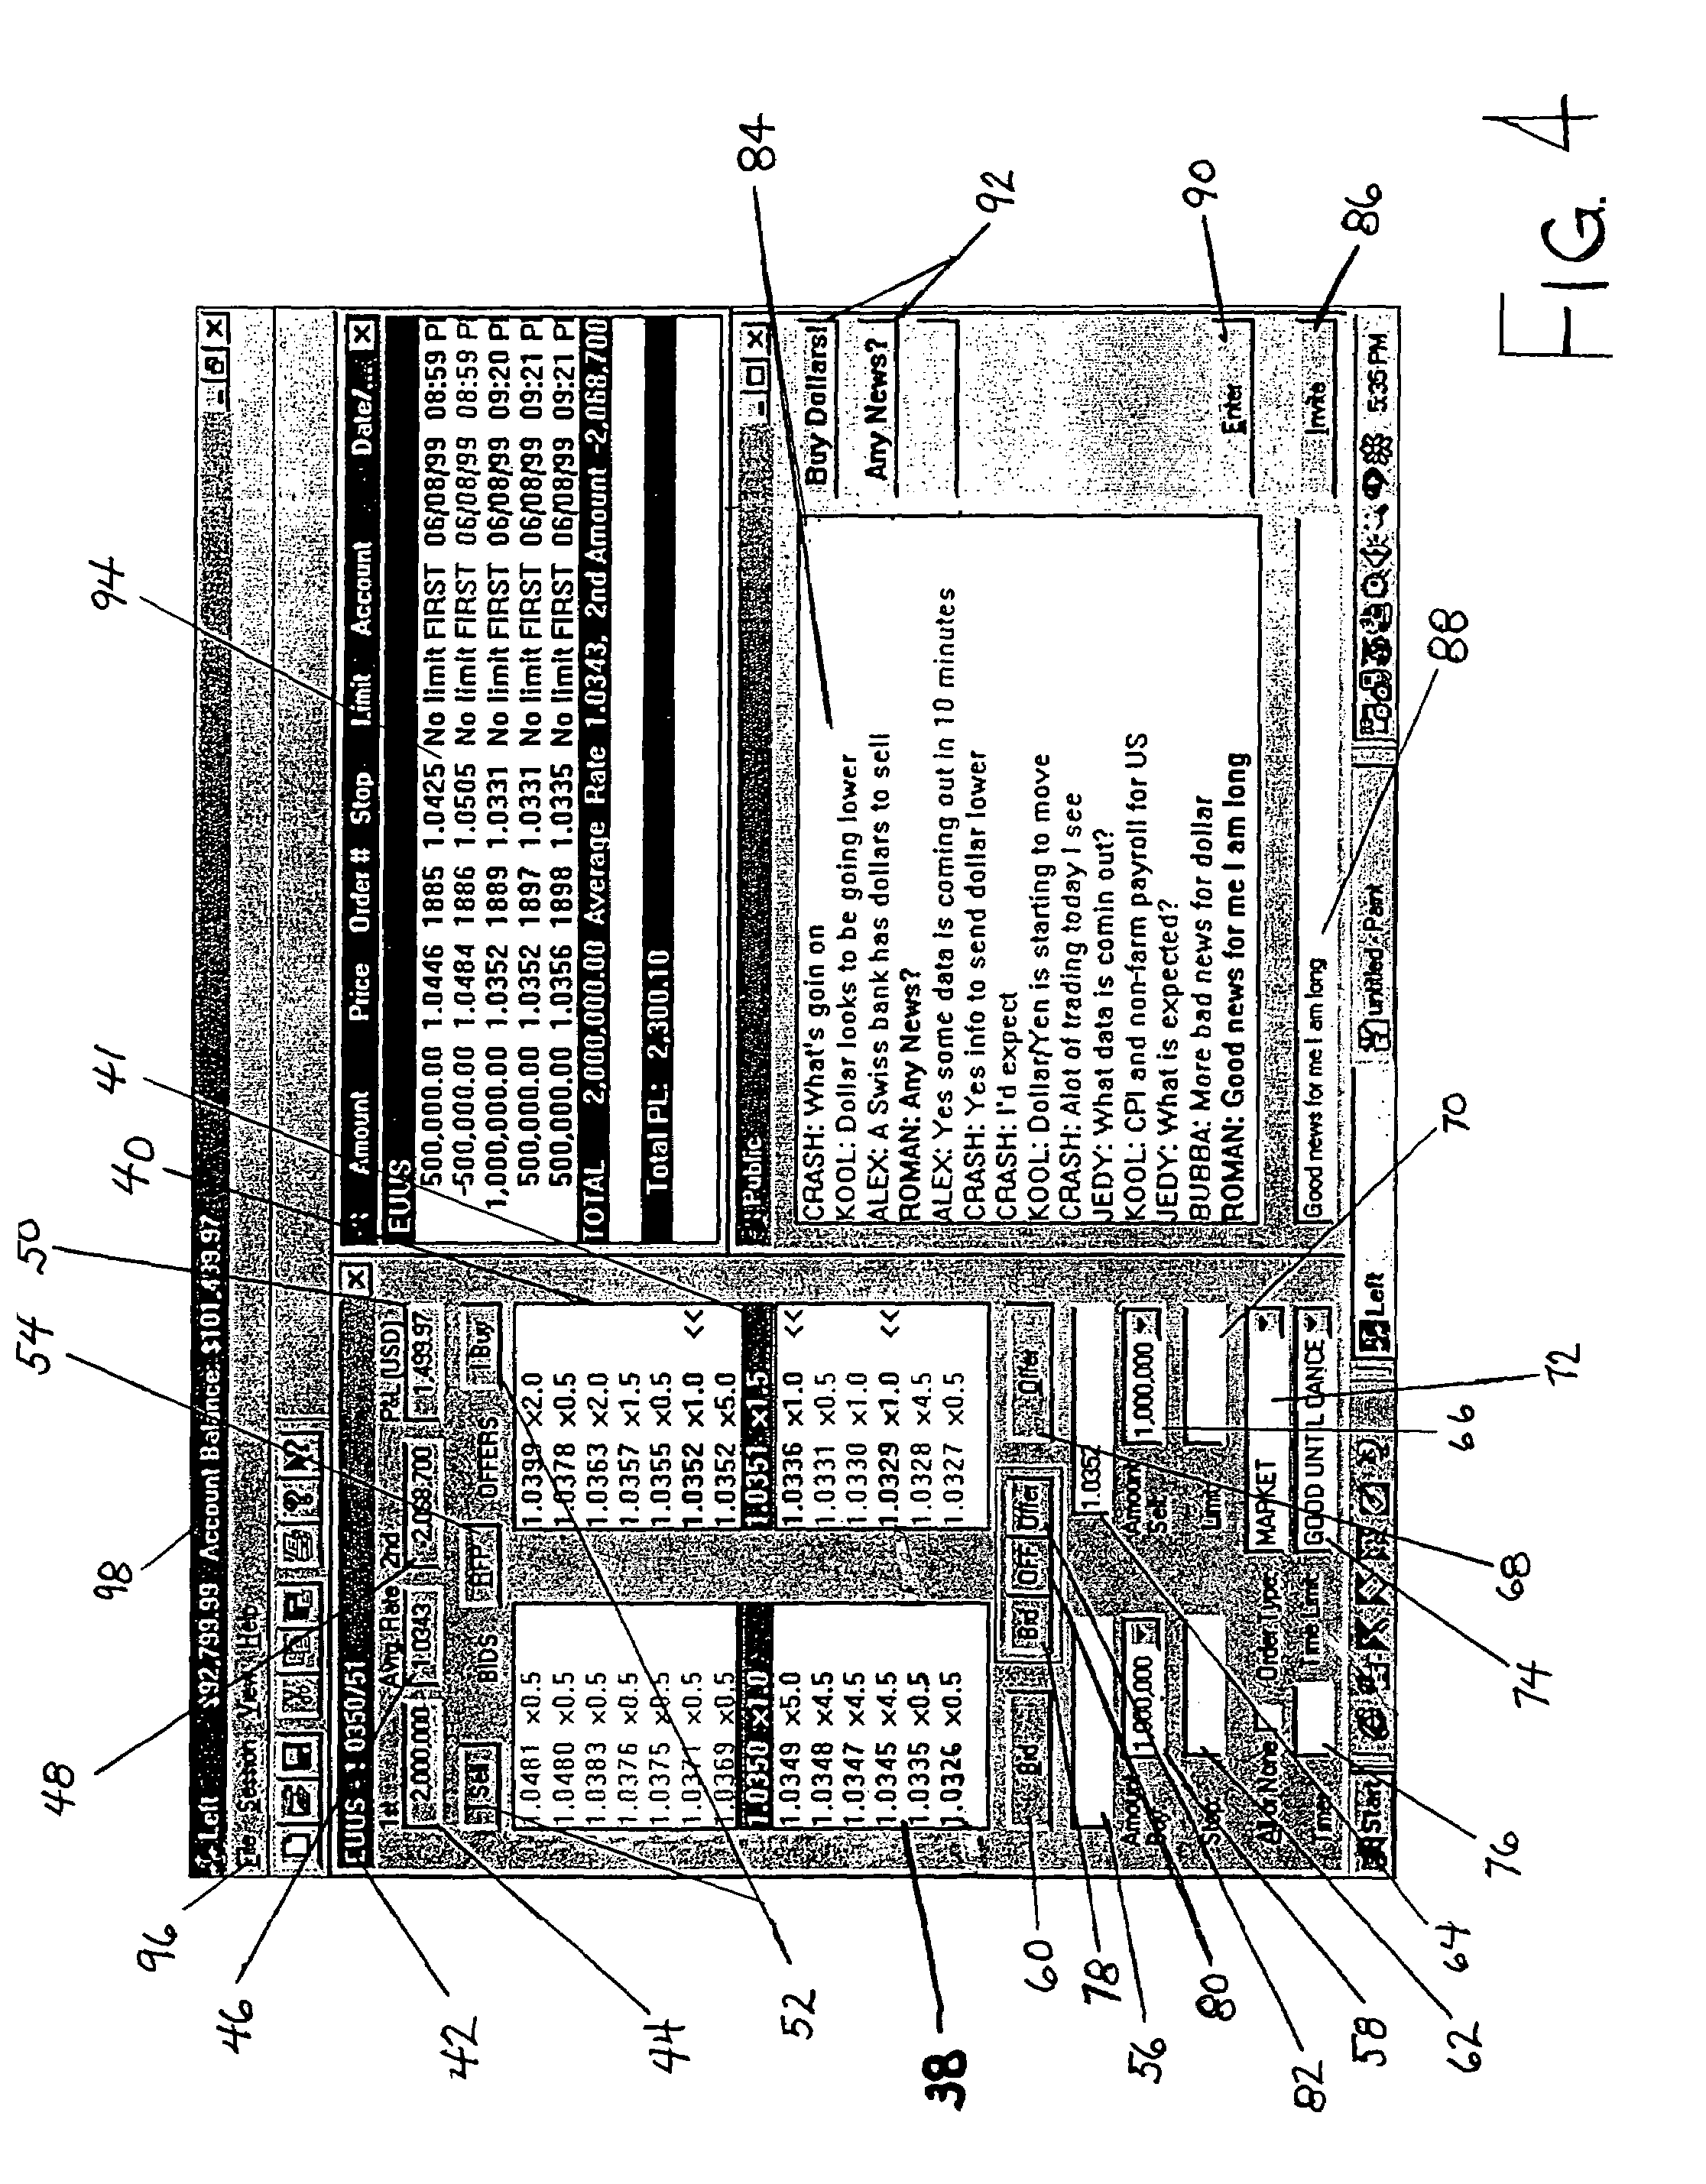 Real-time commodity trading method and apparatus